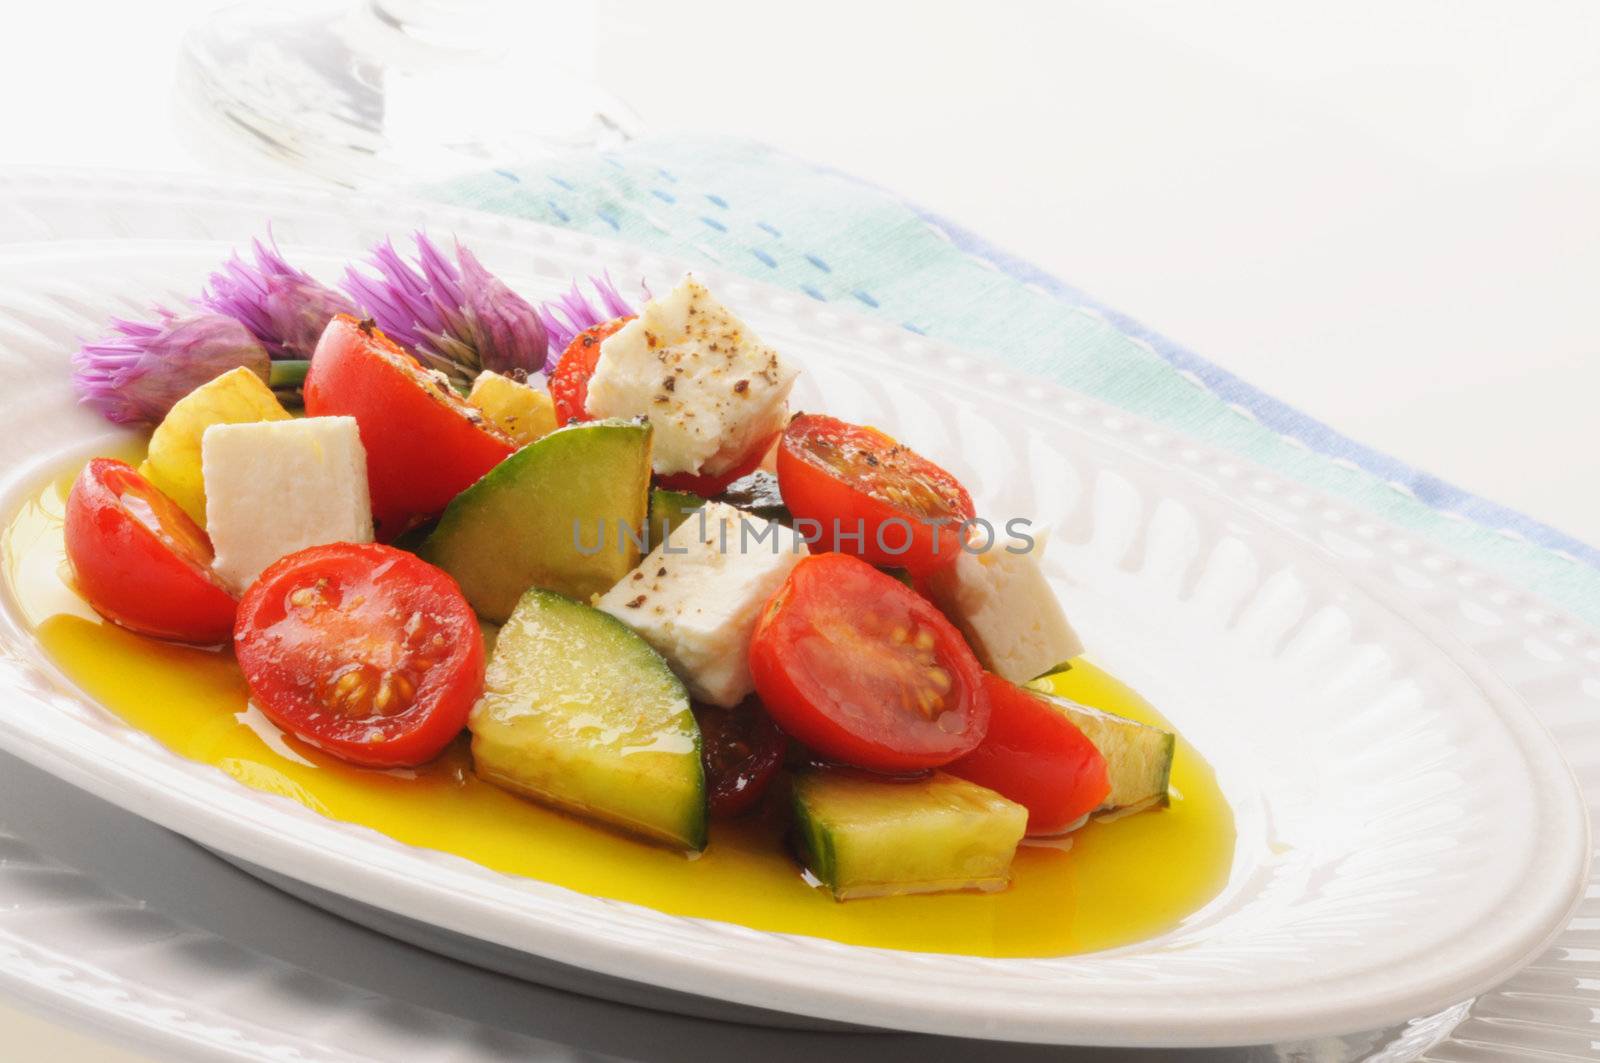 Delicious tomato and cucumber salad with balsamic dressing.